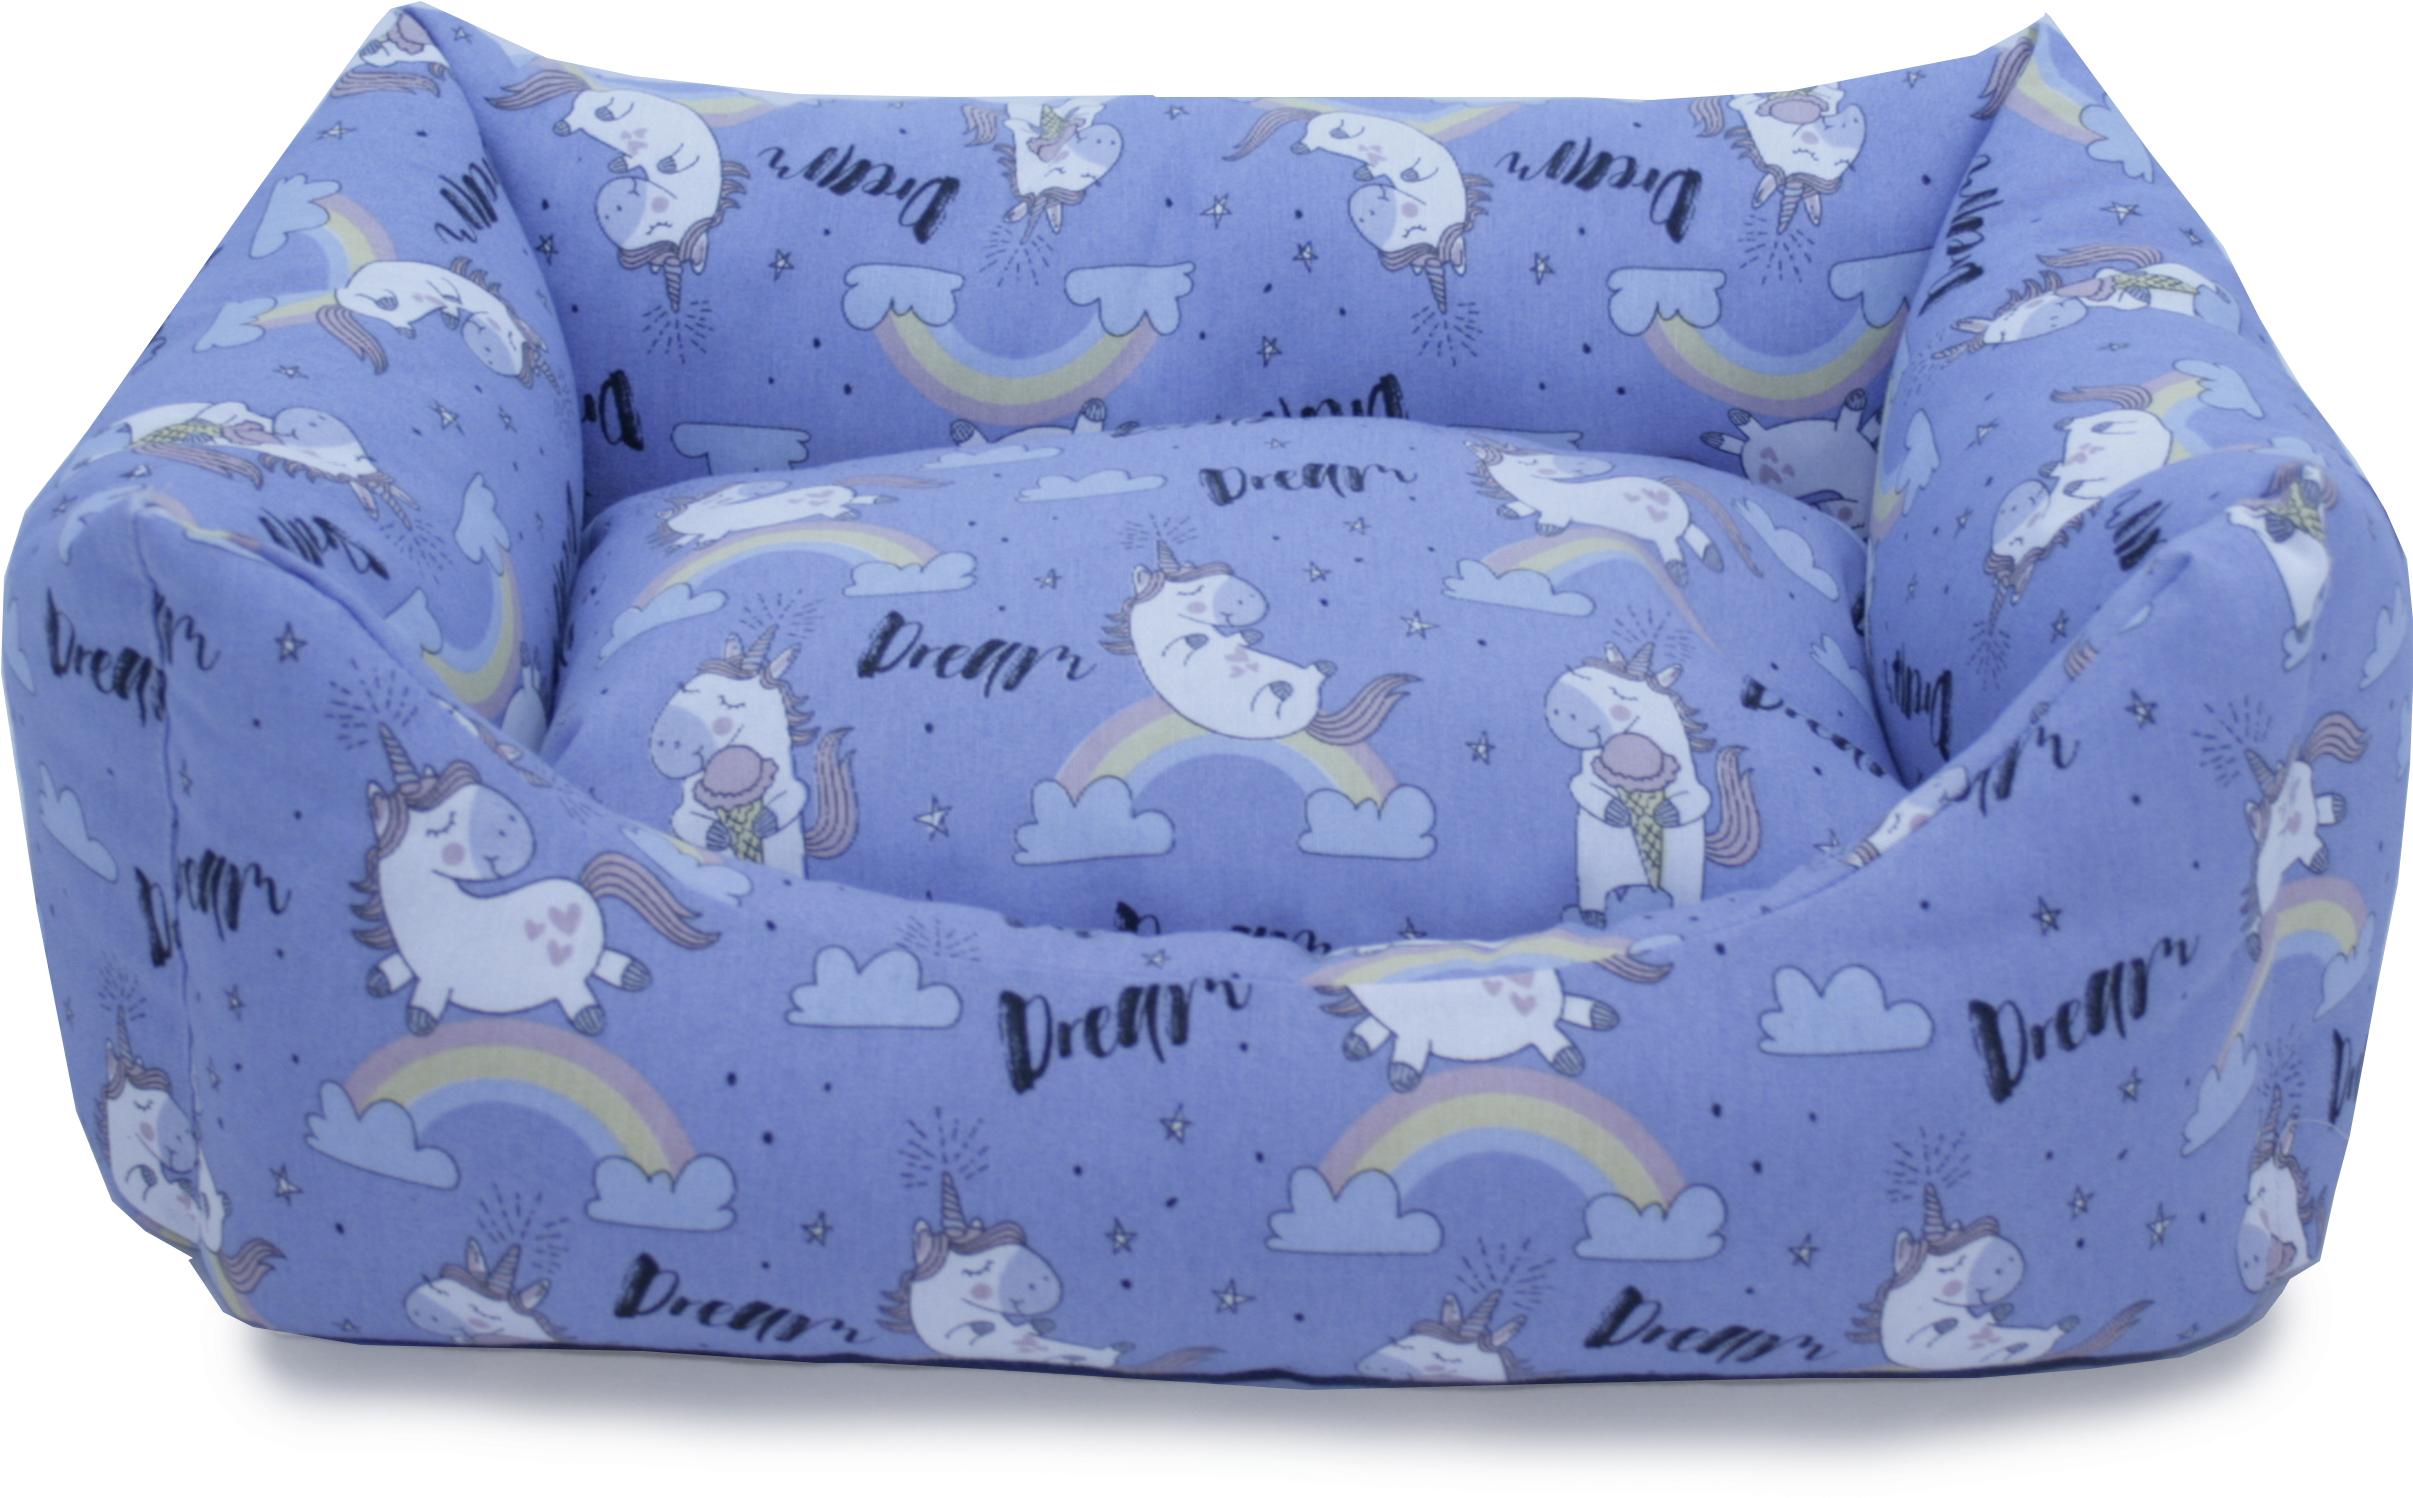 A Blue Dog Bed With Unicorns And Rainbows